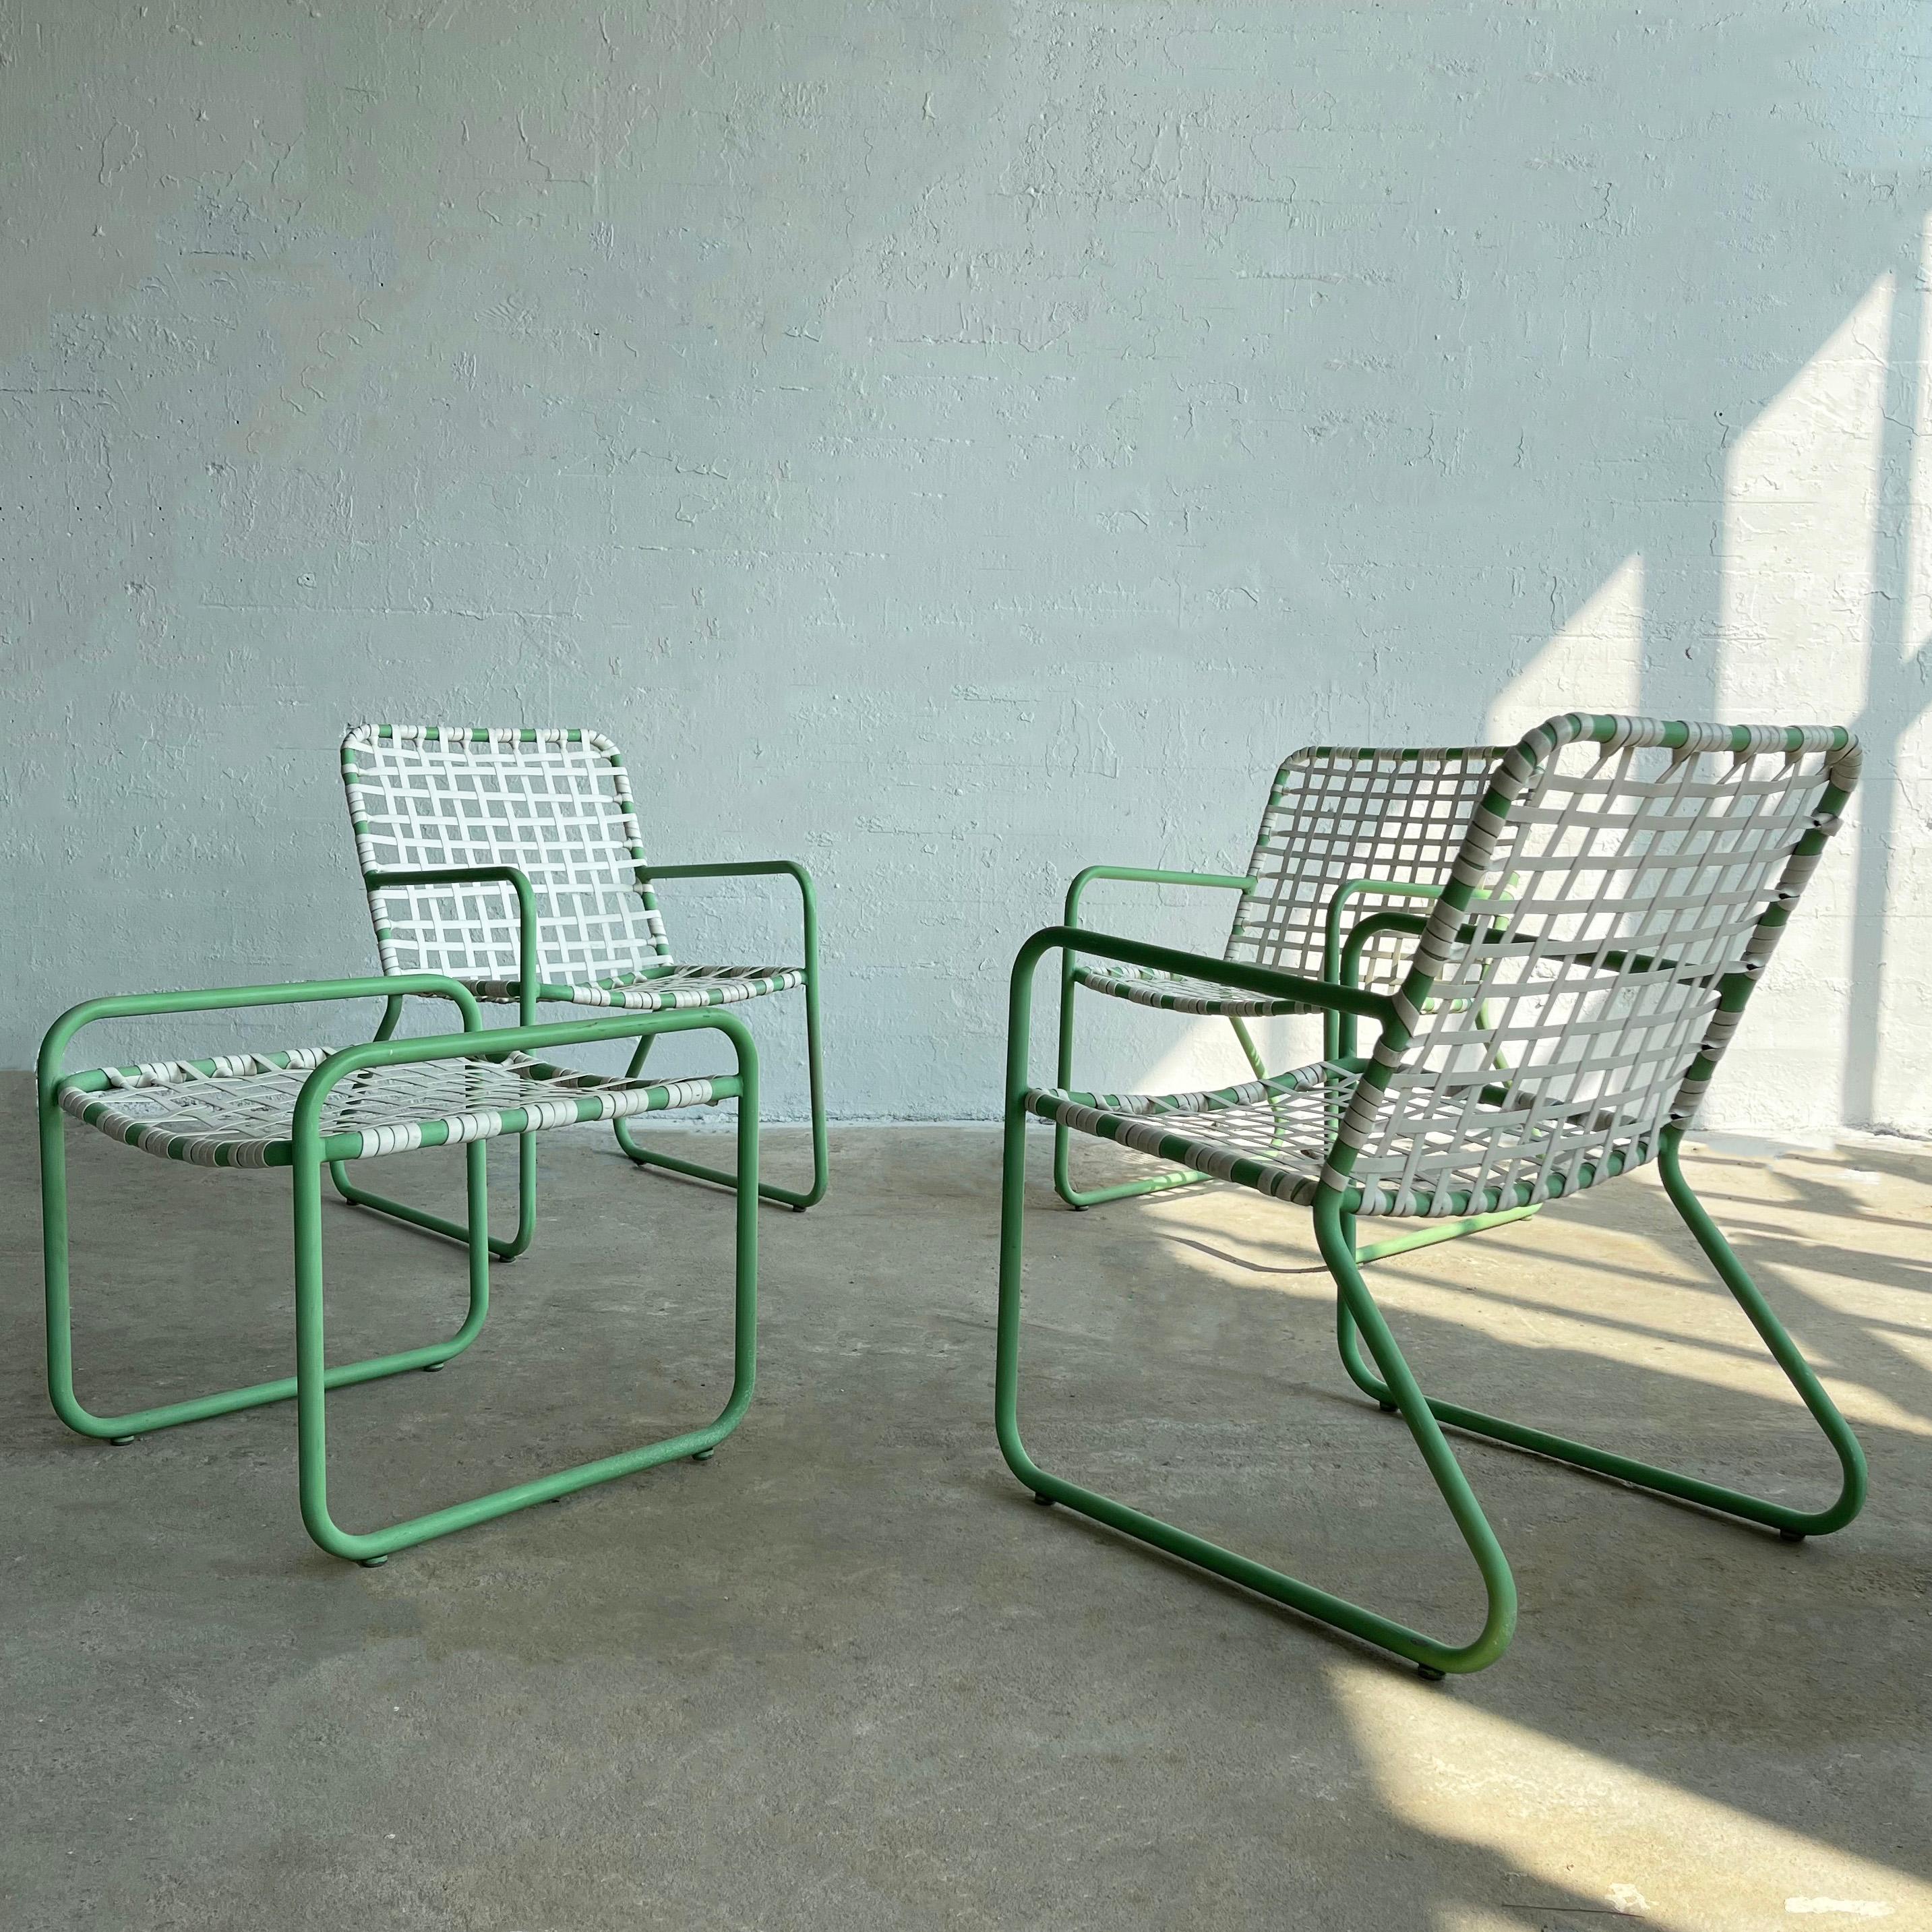 20th Century Mid-Century Modern Woven Outdoor Seating Set By Brown Jordan